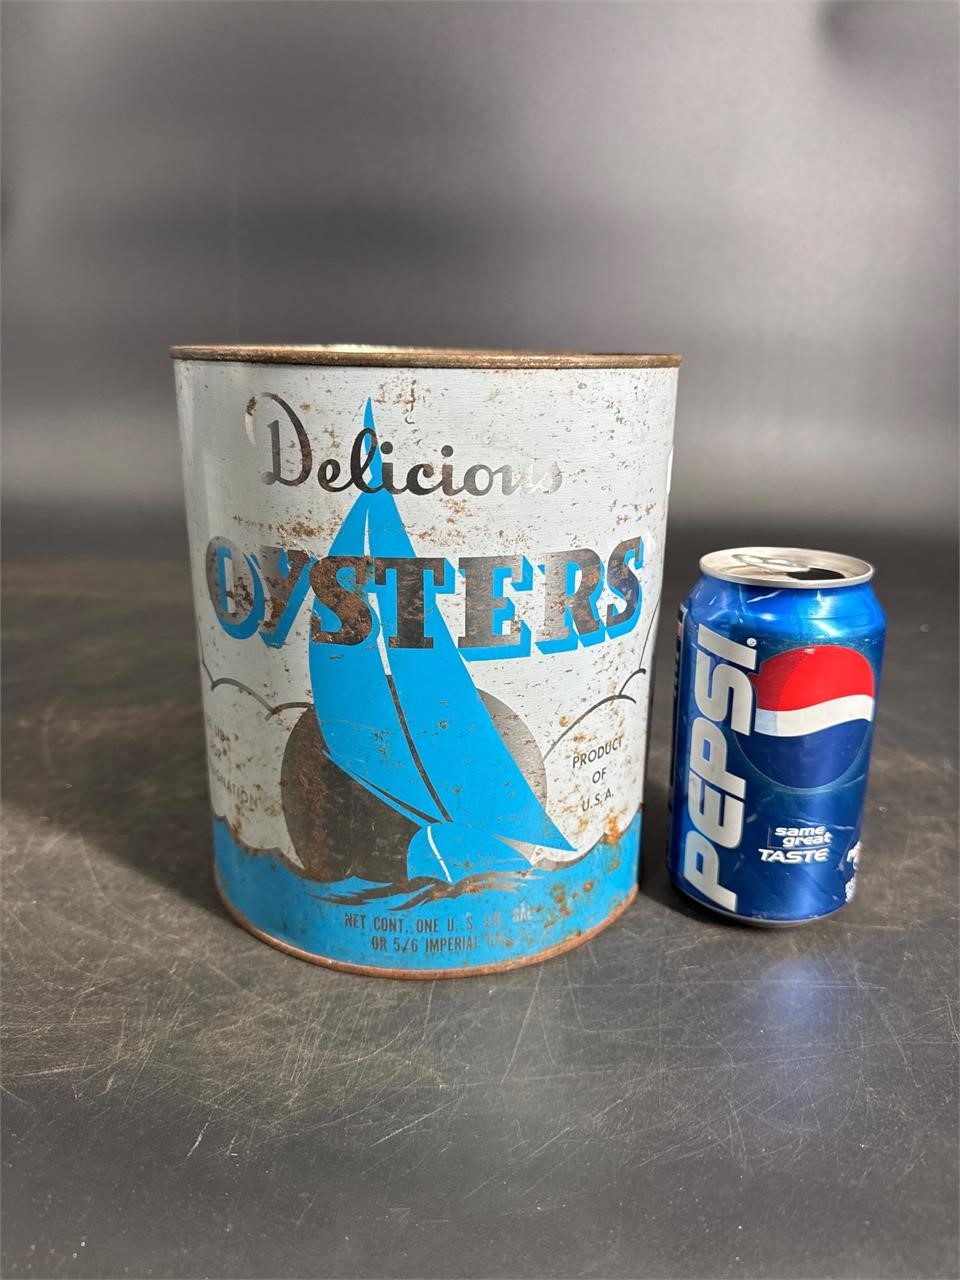 1 GALLON DELICOUS OYSTERS CAN SAILBOAT